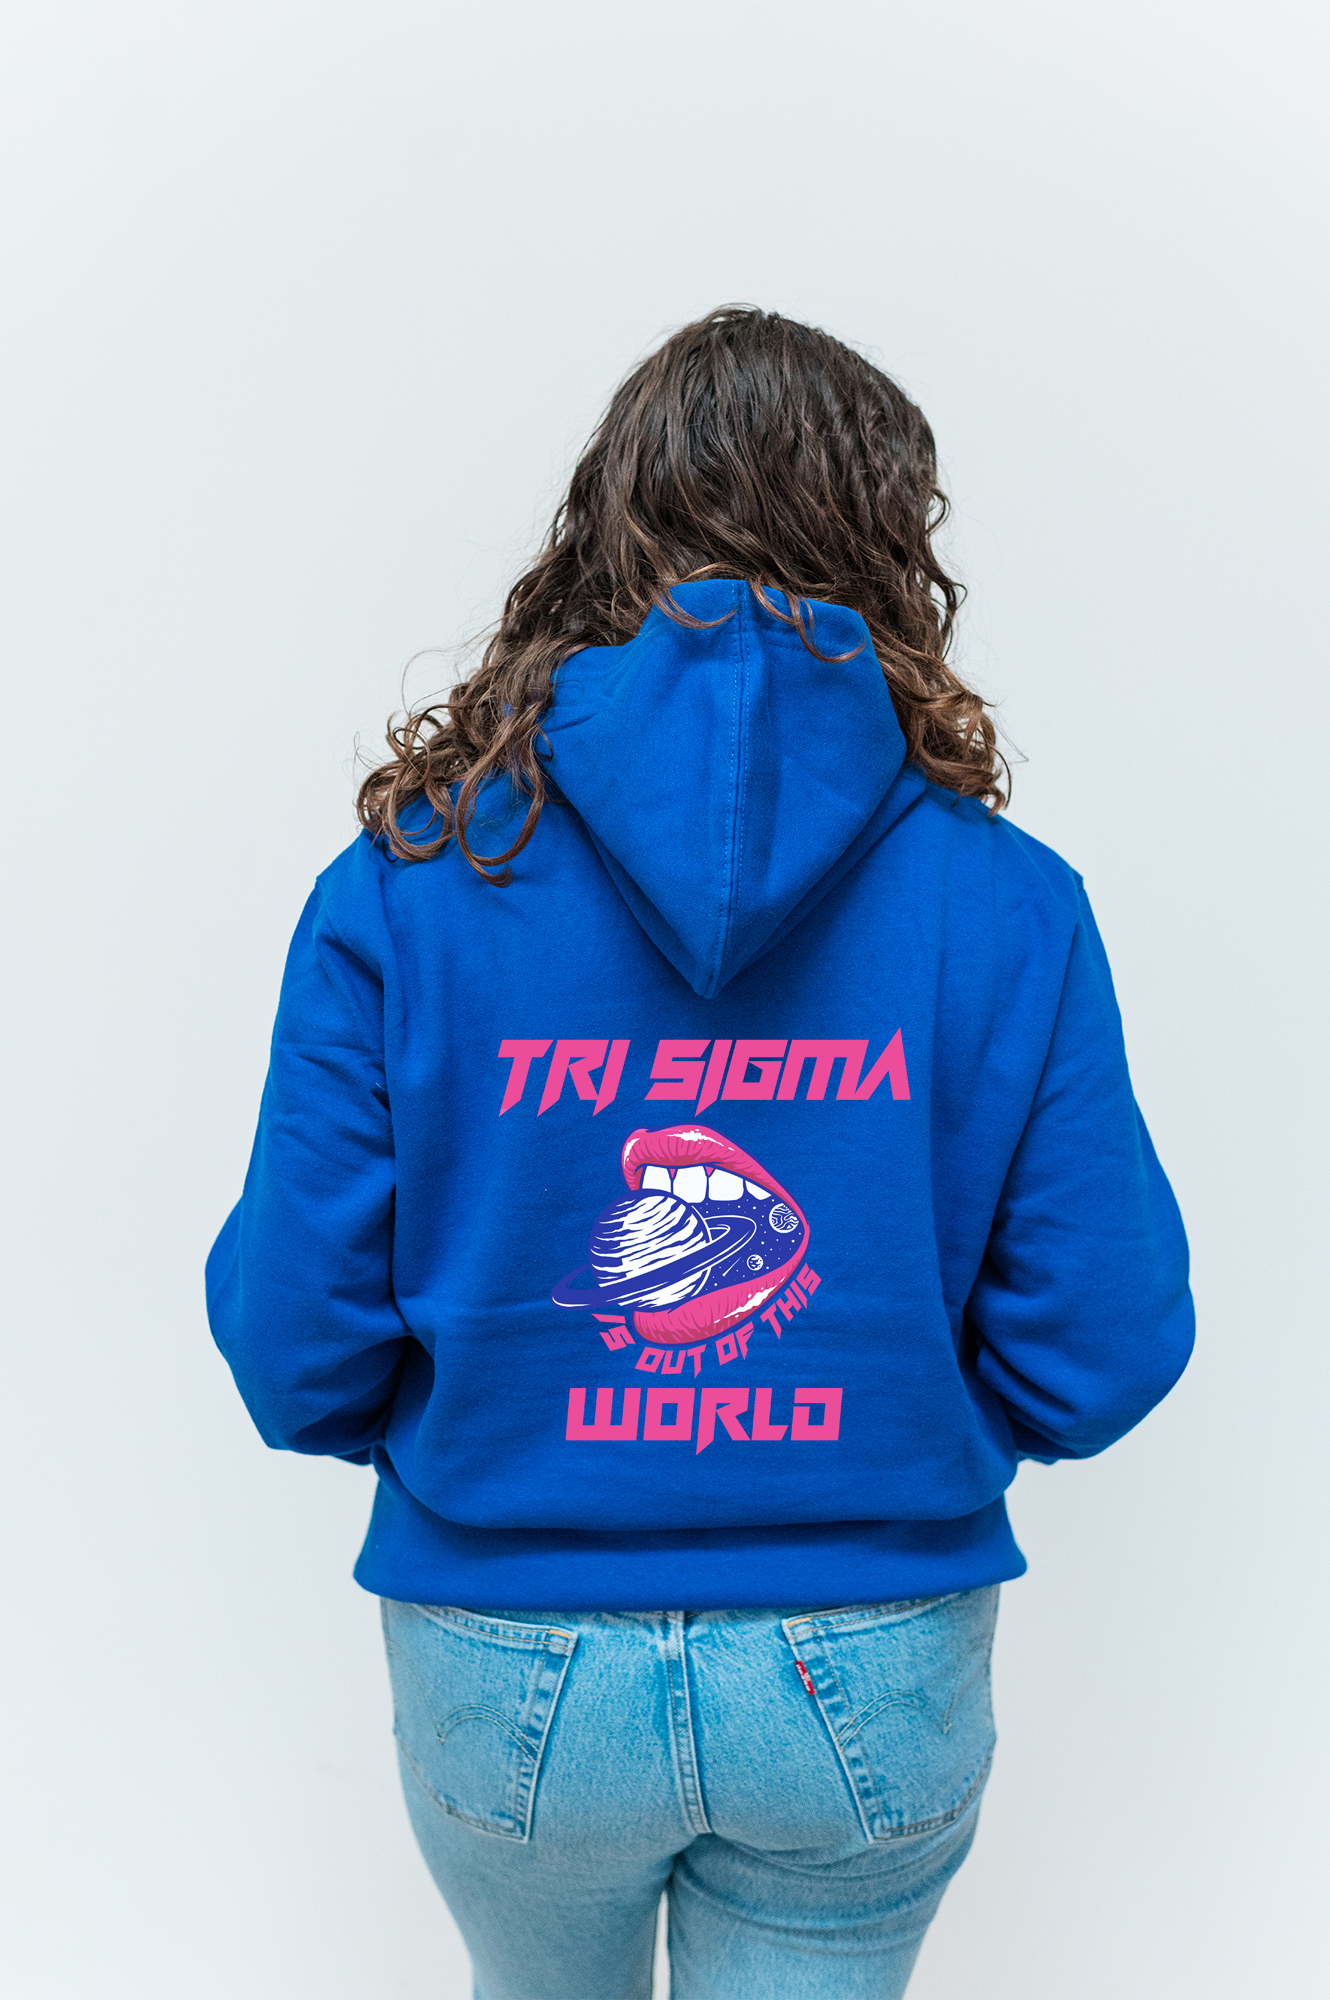 a woman wearing a blue hoodie with a picture of a fish on it